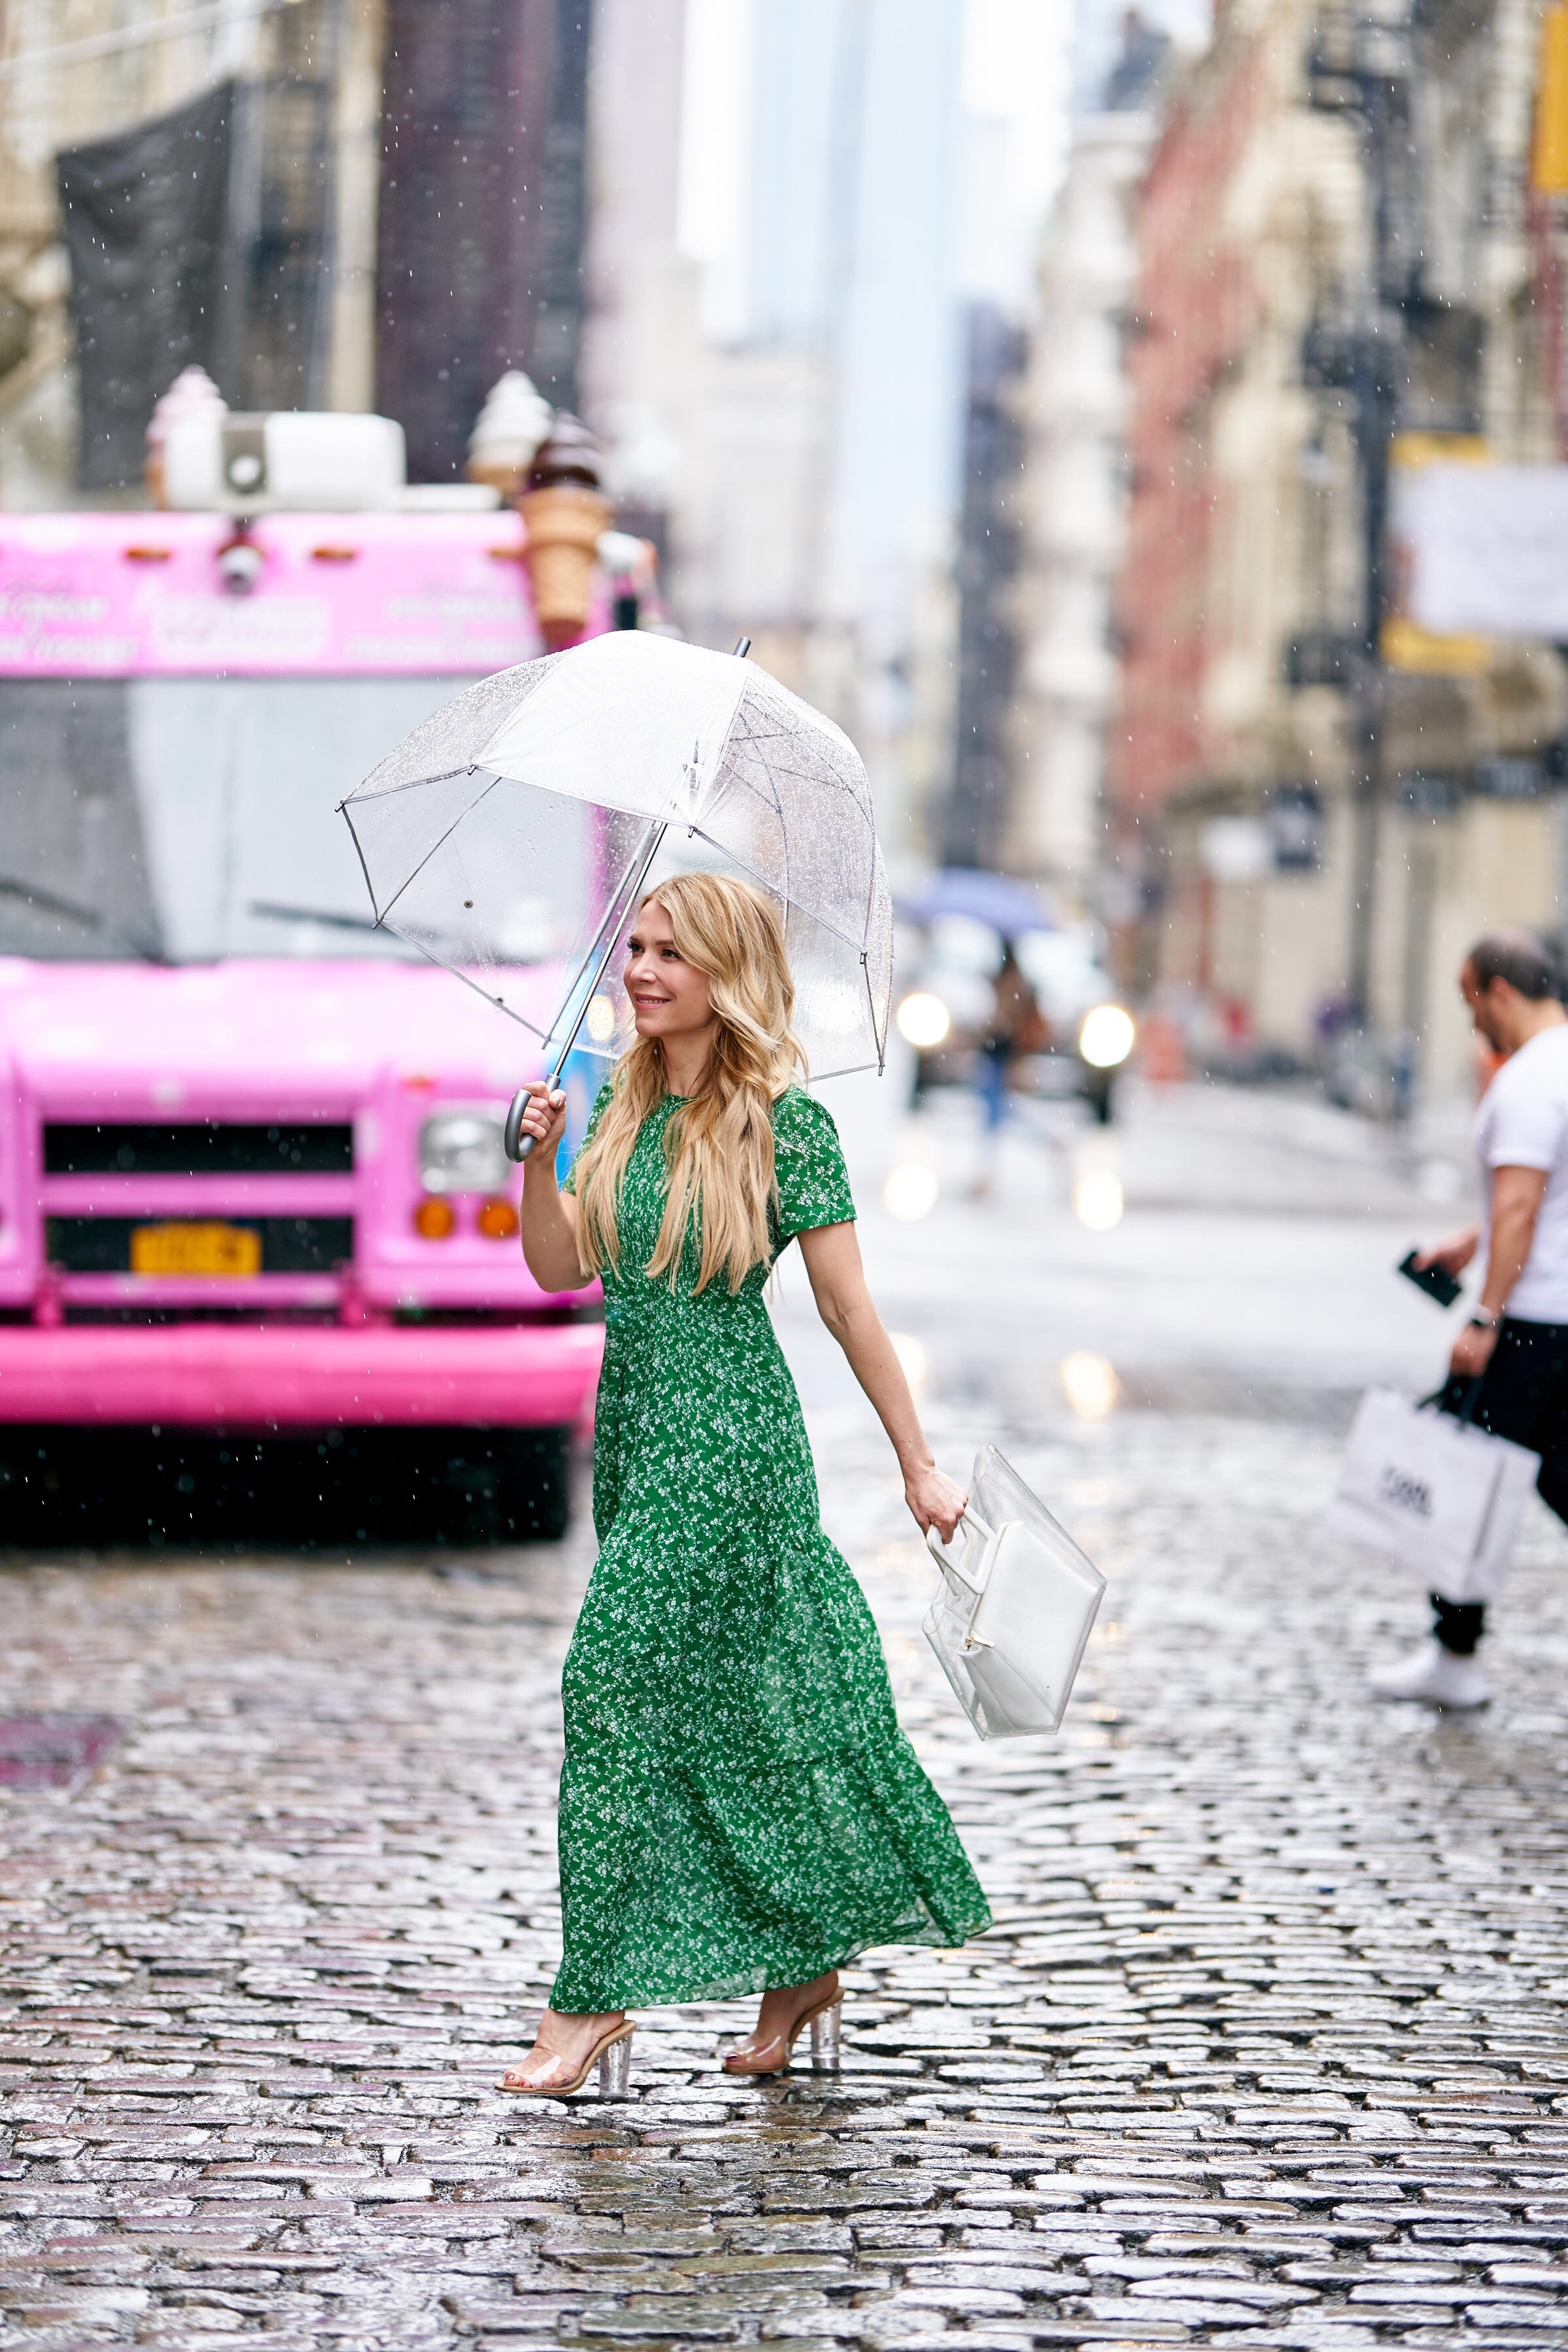 Laura Bonner, About the Outfits, Green Maxi Dress, NYC Fashion Blogger